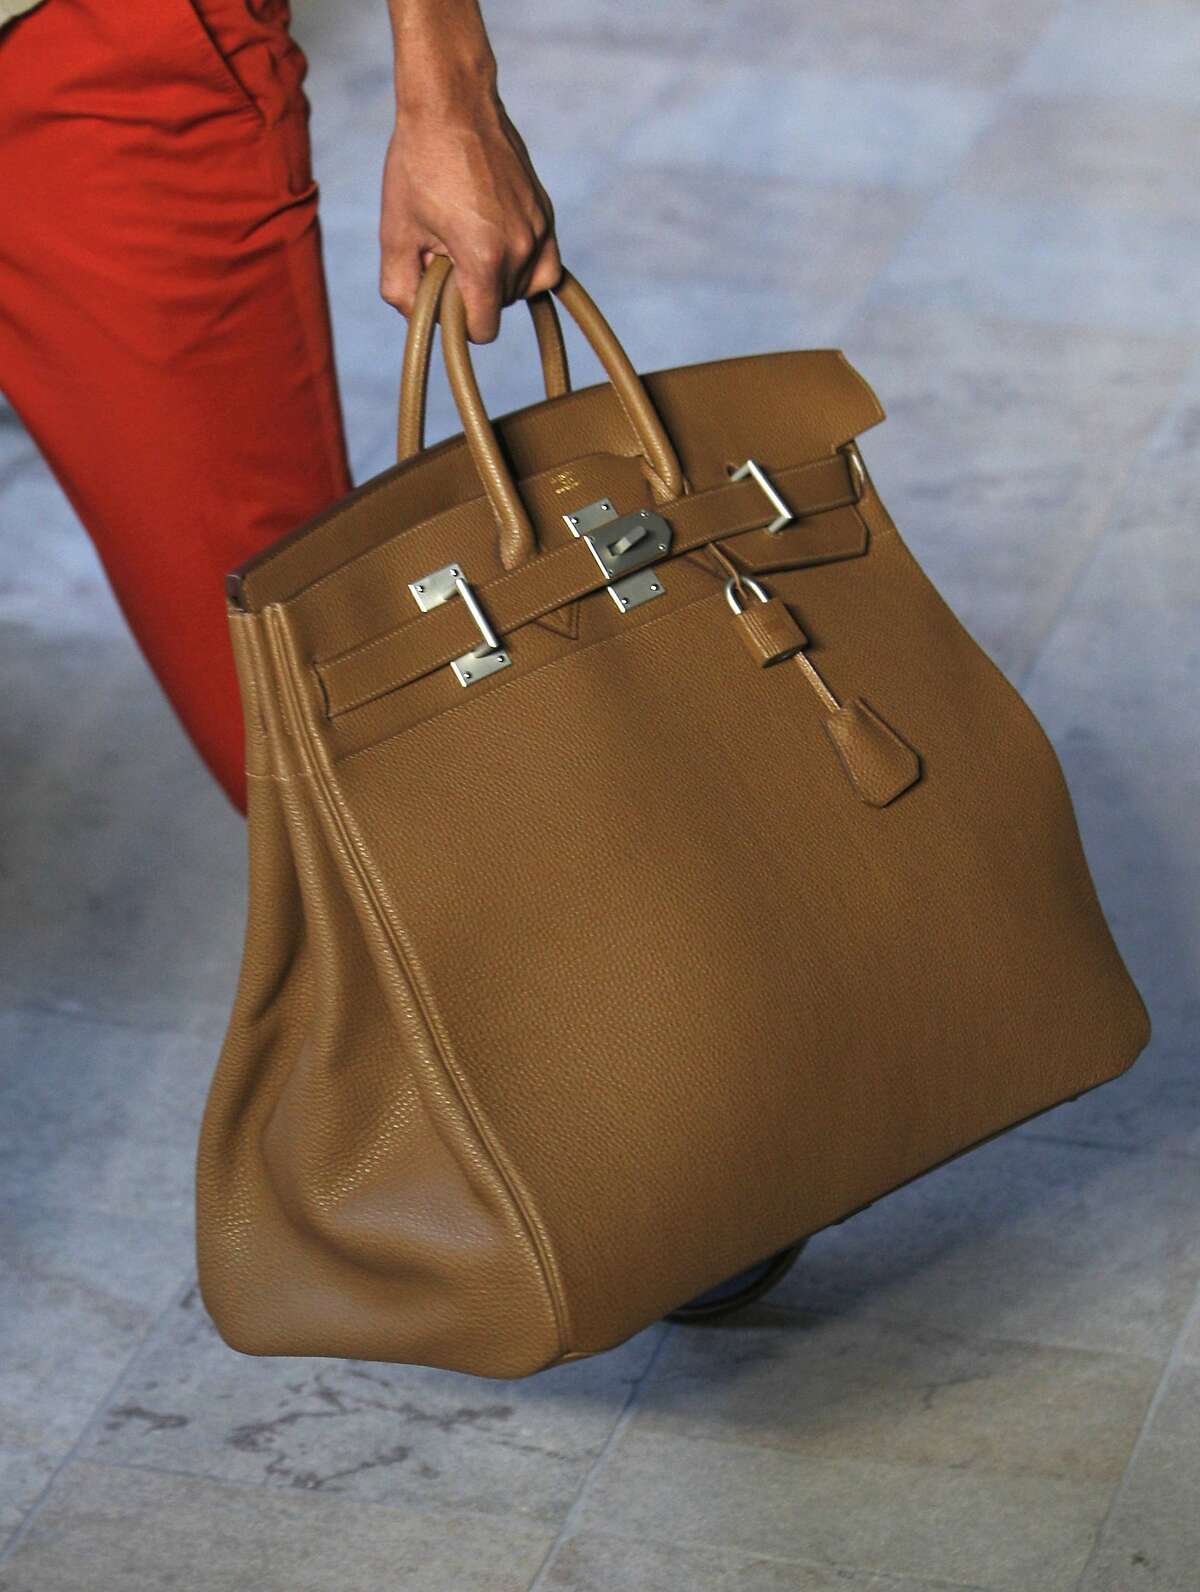 In the book "Primates of Park Avenue," by Wednesday Martin, the author uses anthropology to explain the tribal practices of mothers in the Upper East Side of New York, including their dress codes and which accessories carry the most status. The Birkin bag by Hermes is considered one of the most coveted handbags, starting at $8,000 for plain leather bag and running up to $150,000 or more for bags in crocodile or ostrich skin. (AP Photo/Jacques Brinon, 2011, File)